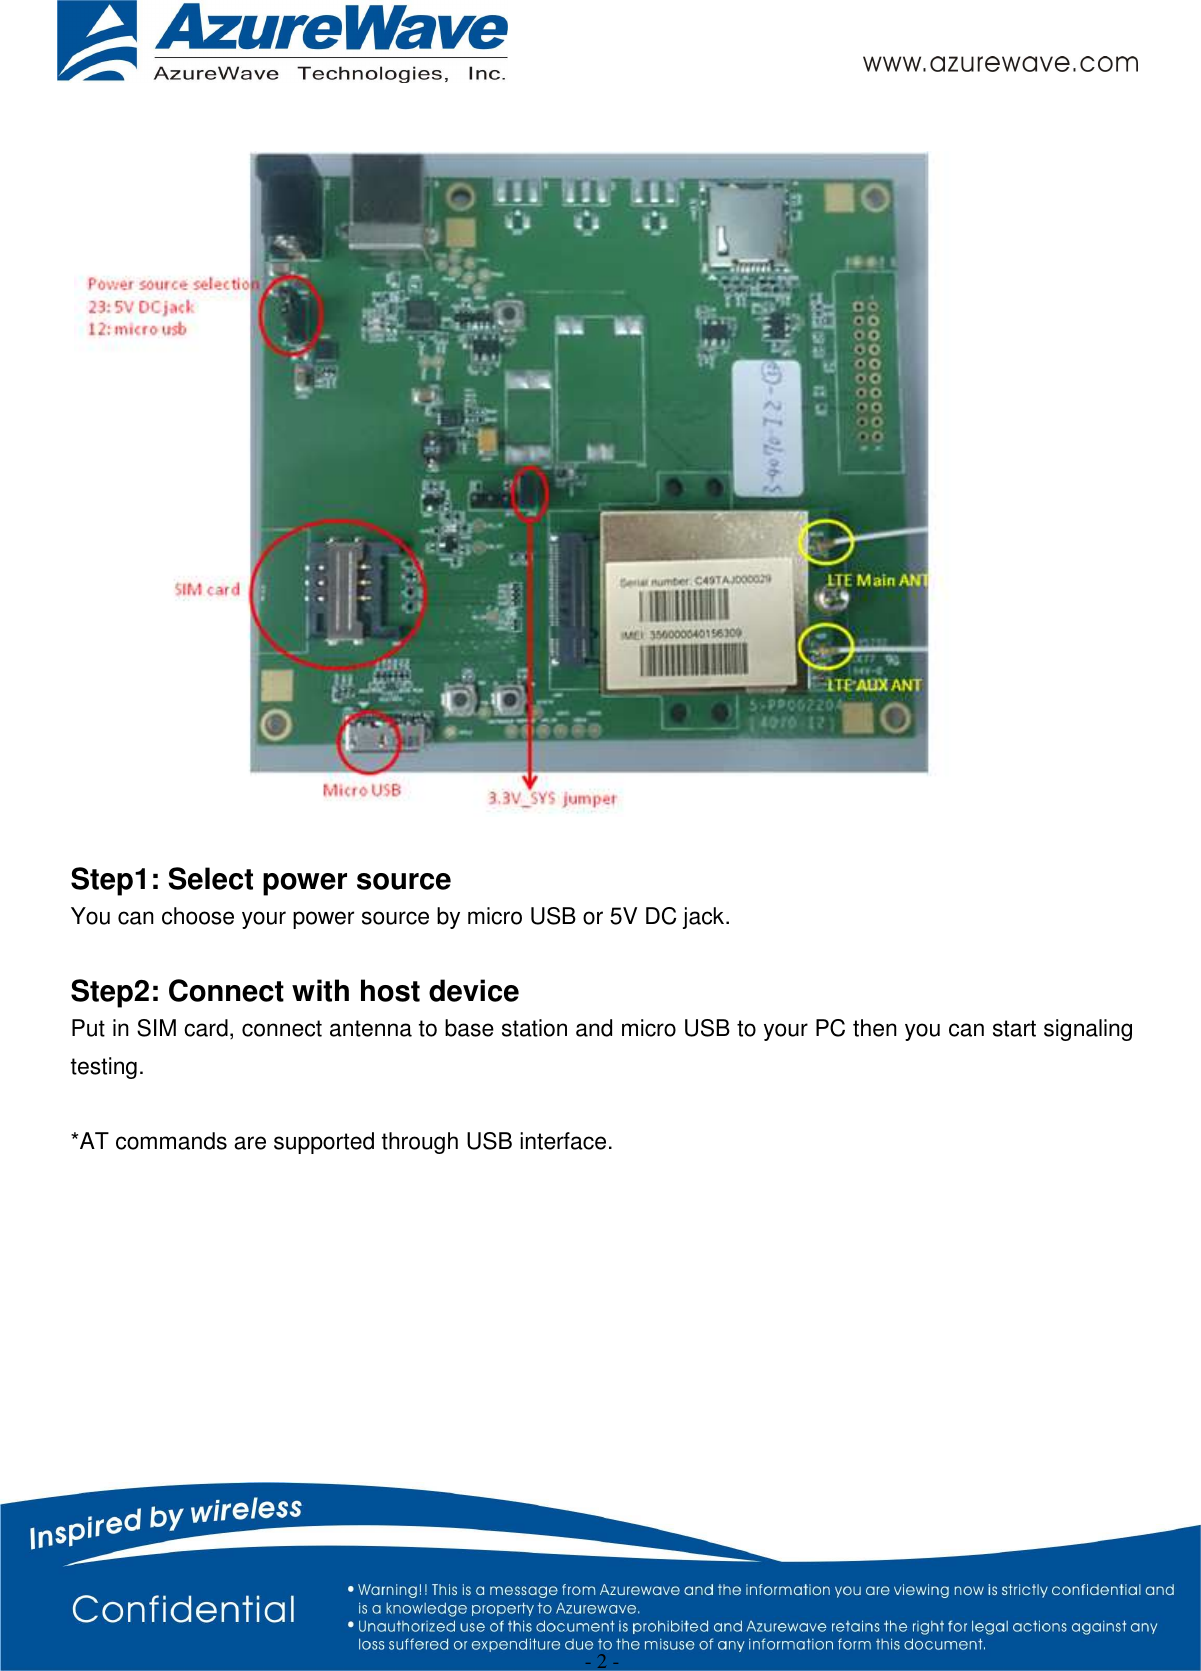                                                   - 2 -      Step1: Select power source You can choose your power source by micro USB or 5V DC jack.    Step2: Connect with host device Put in SIM card, connect antenna to base station and micro USB to your PC then you can start signaling testing.  *AT commands are supported through USB interface.    